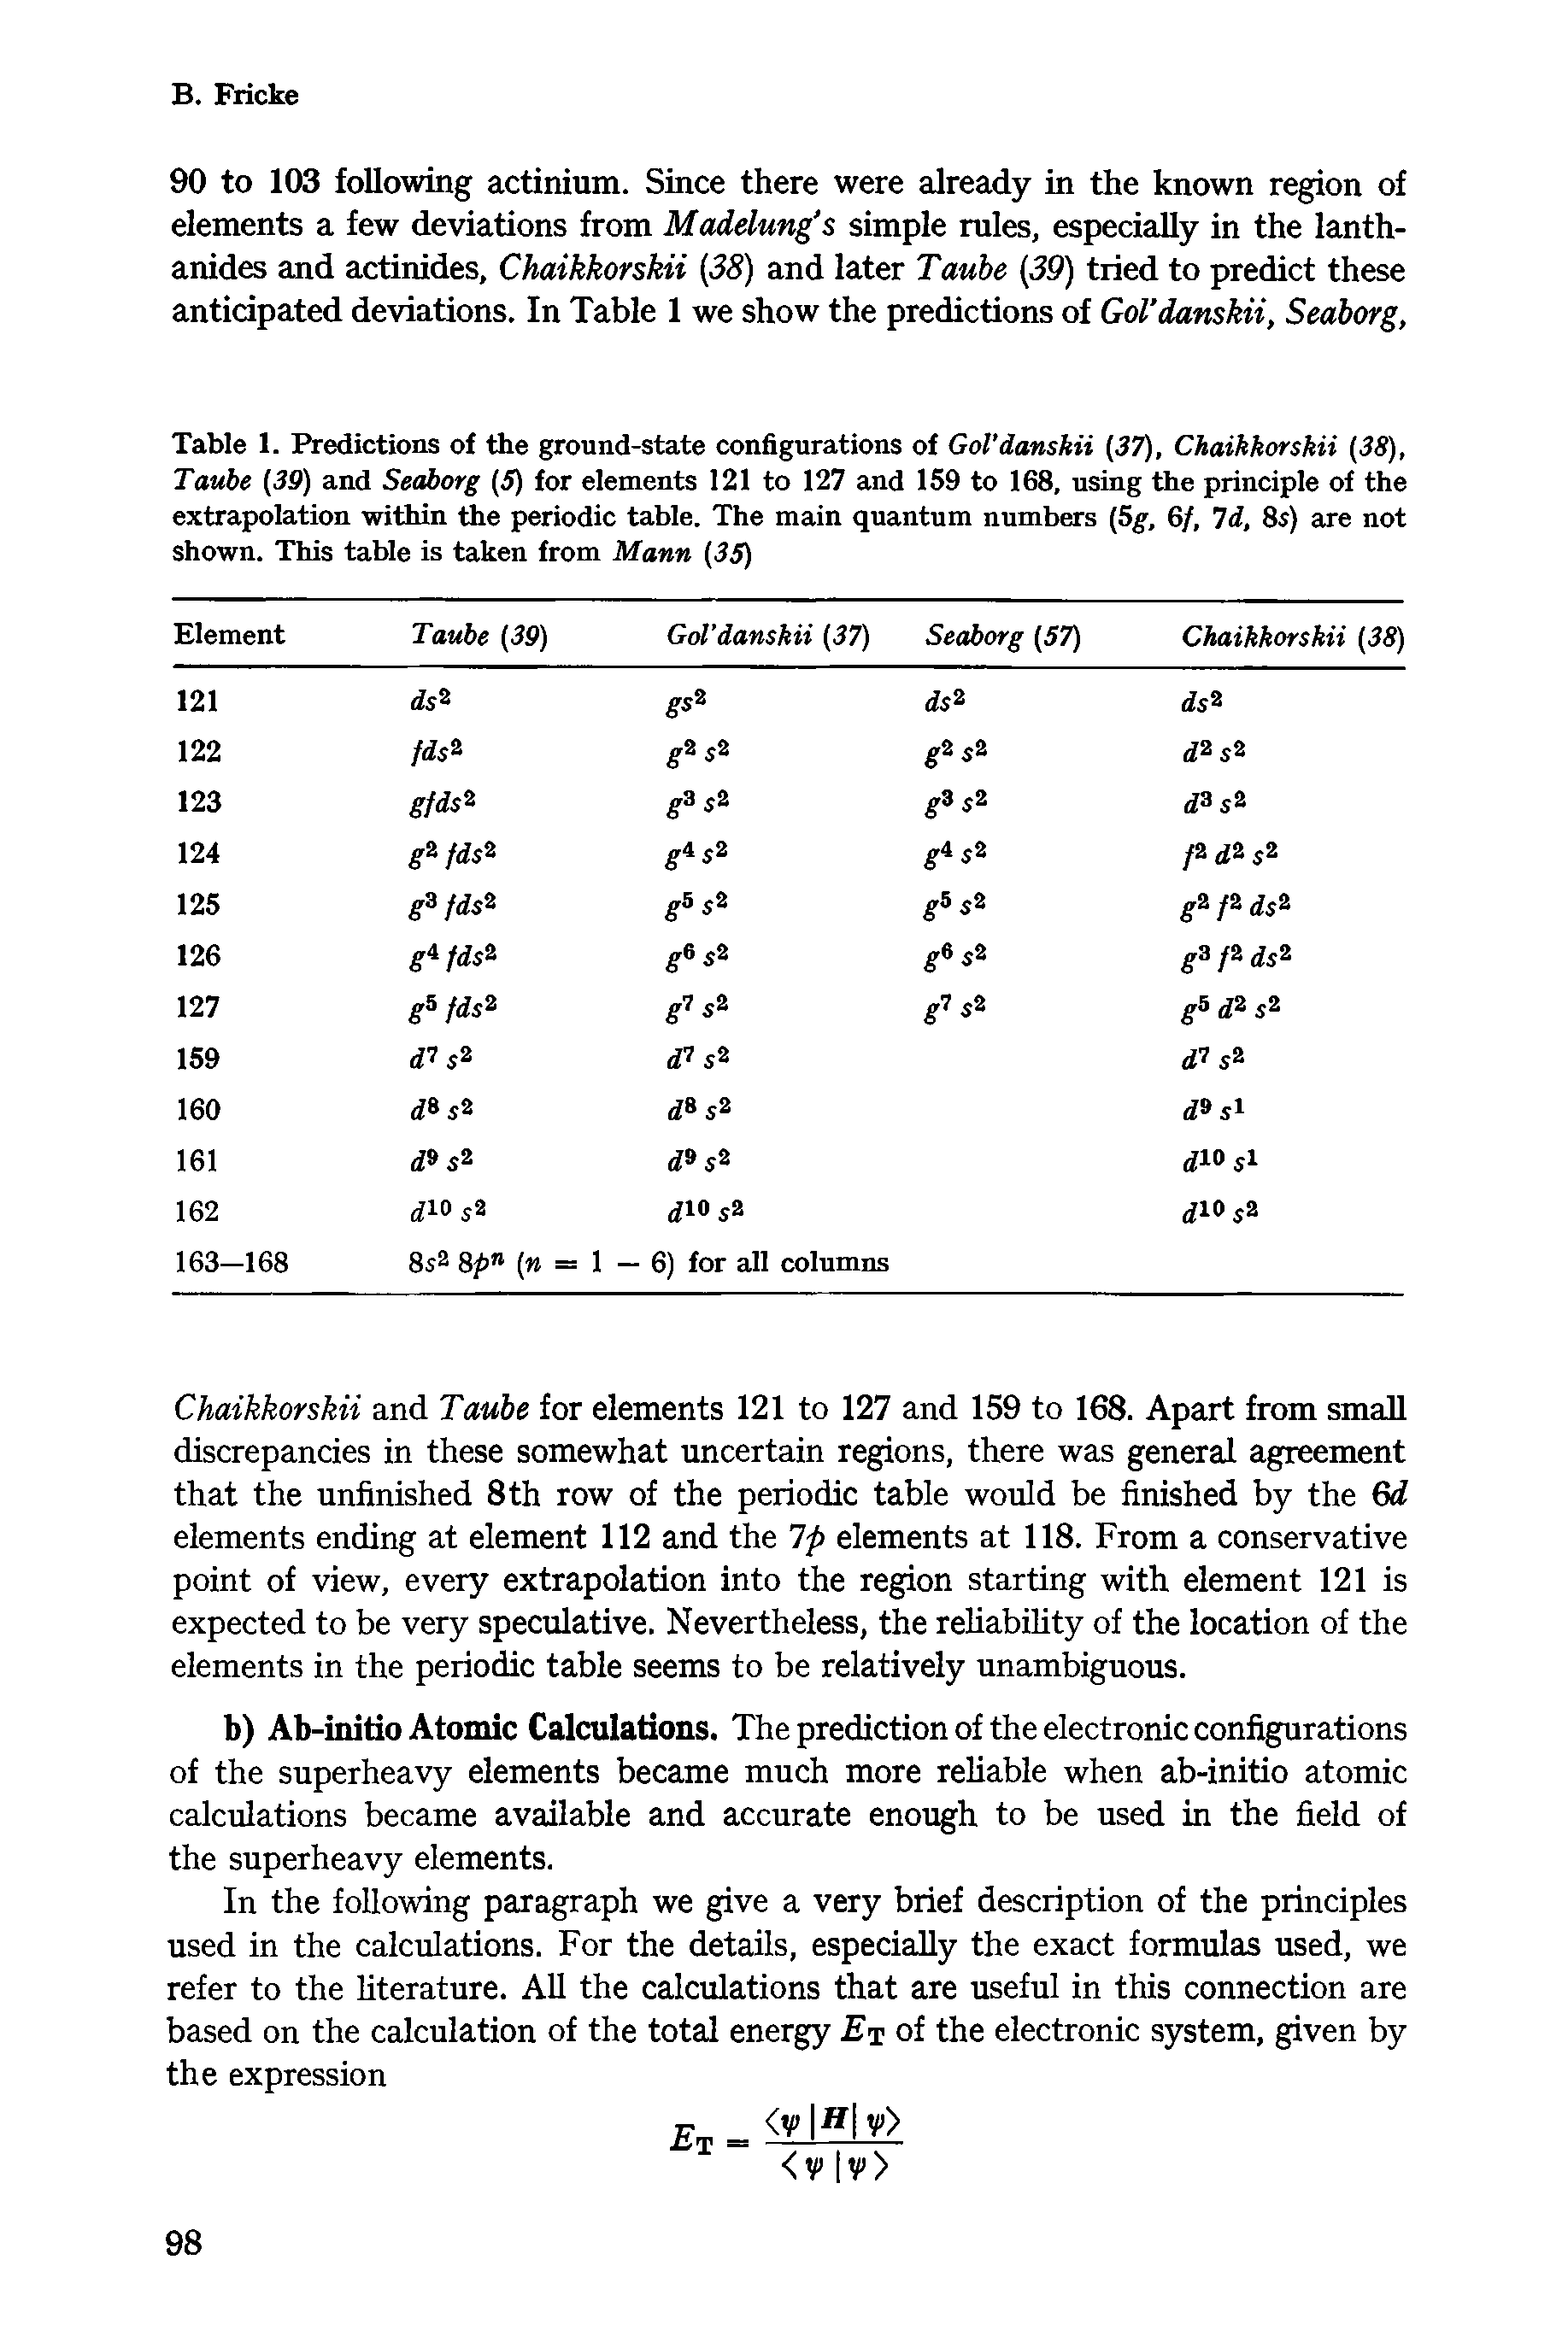 Table 1. Predictions of the ground-state configurations of Gol danskii [37), Chaikkorskii [38), Taube [39) and Seaborg (5) for elements 121 to 127 and 159 to 168, using the principle of the extrapolation within the periodic table. The main quantum numbers [5g, 6/, Id, 8s) are not shown. This table is taken from Mann [3S)...